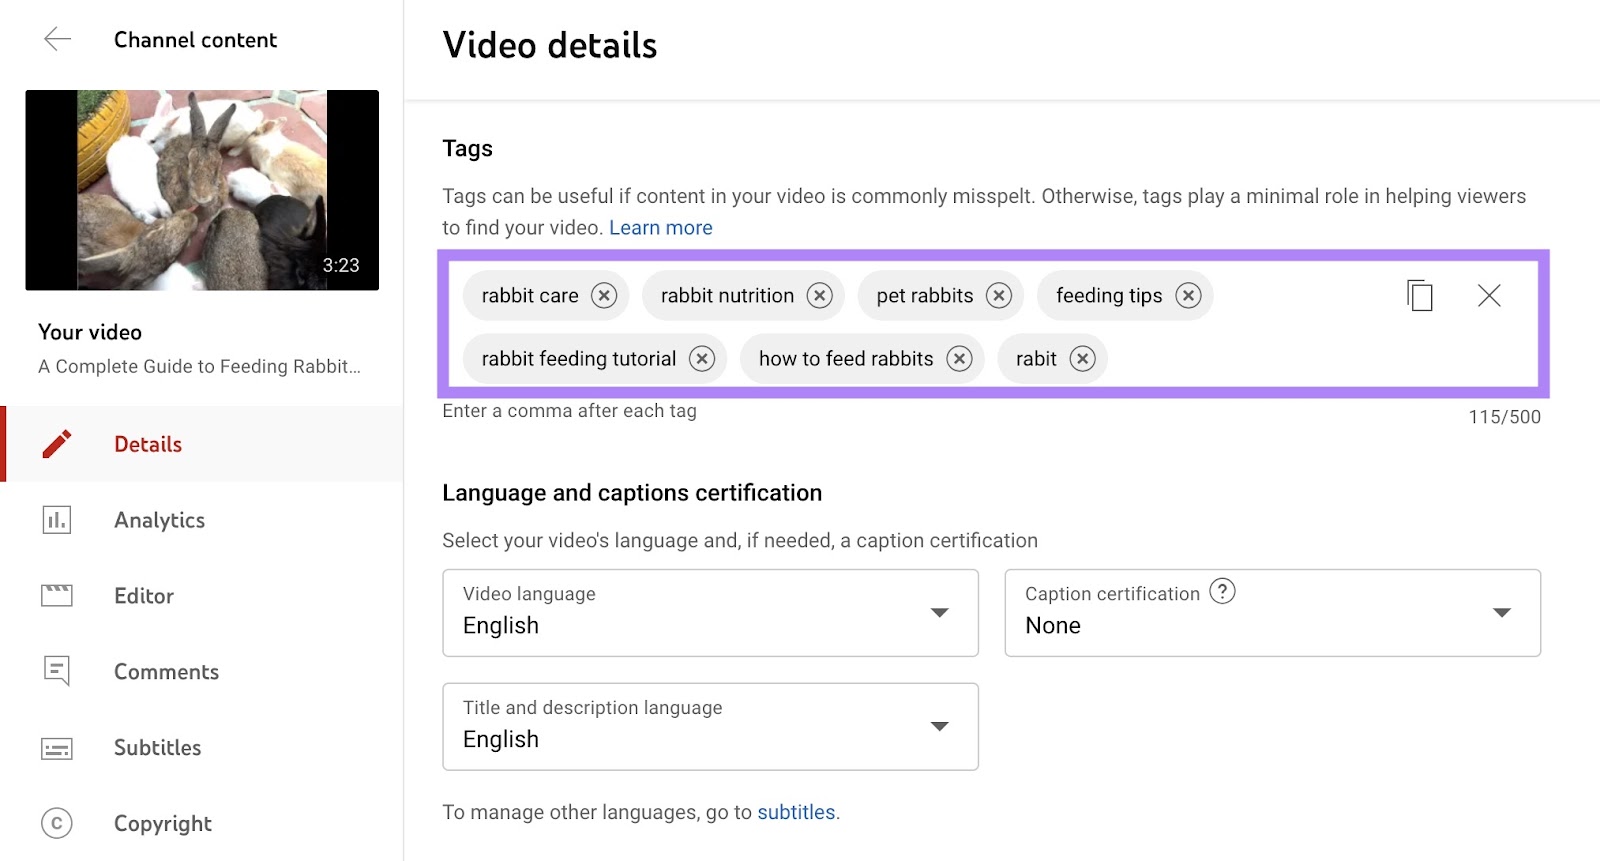 Adding tags to an existing video on Youtube on the "Video details" page.